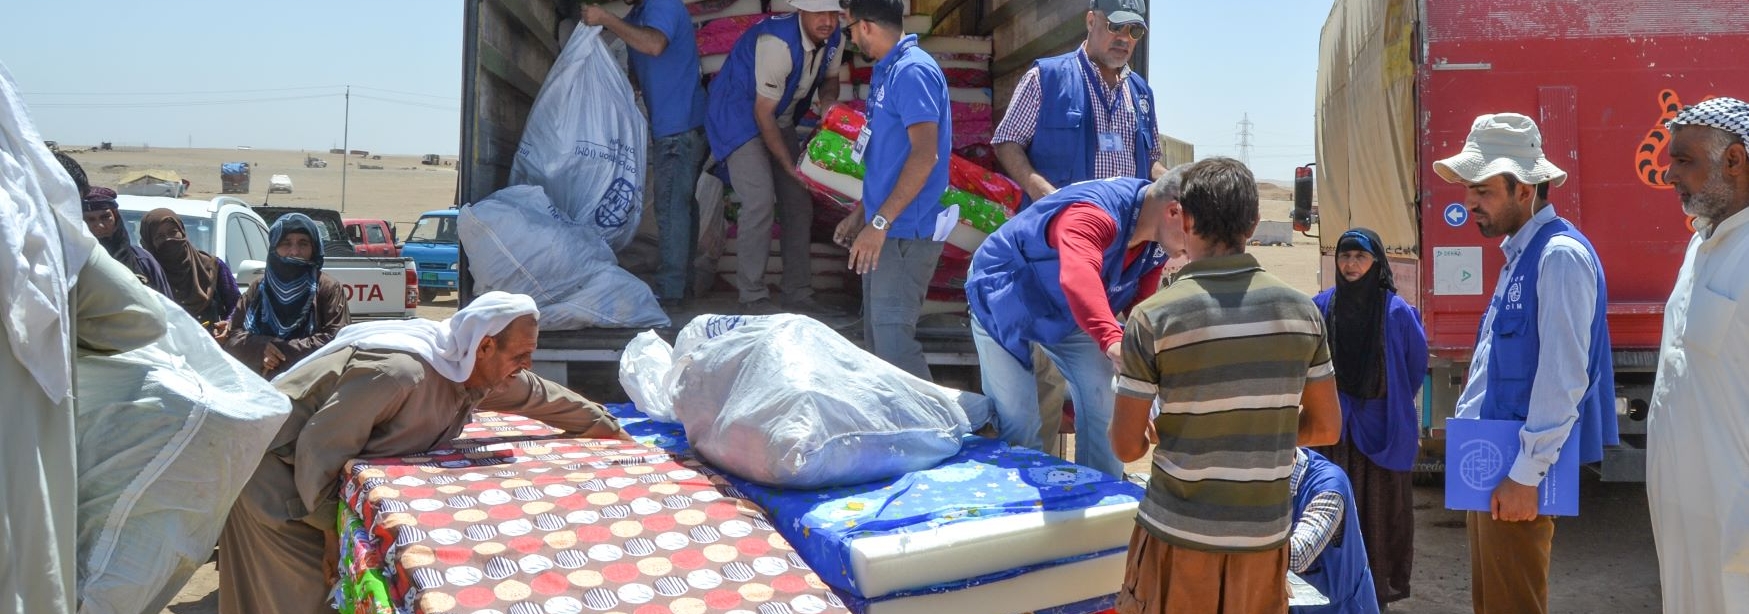 IOM staffers, from the Rapid Assessment Response Team (RART), visited the Badoush settlement to distribute much-needed NFI assistance to the displaced population